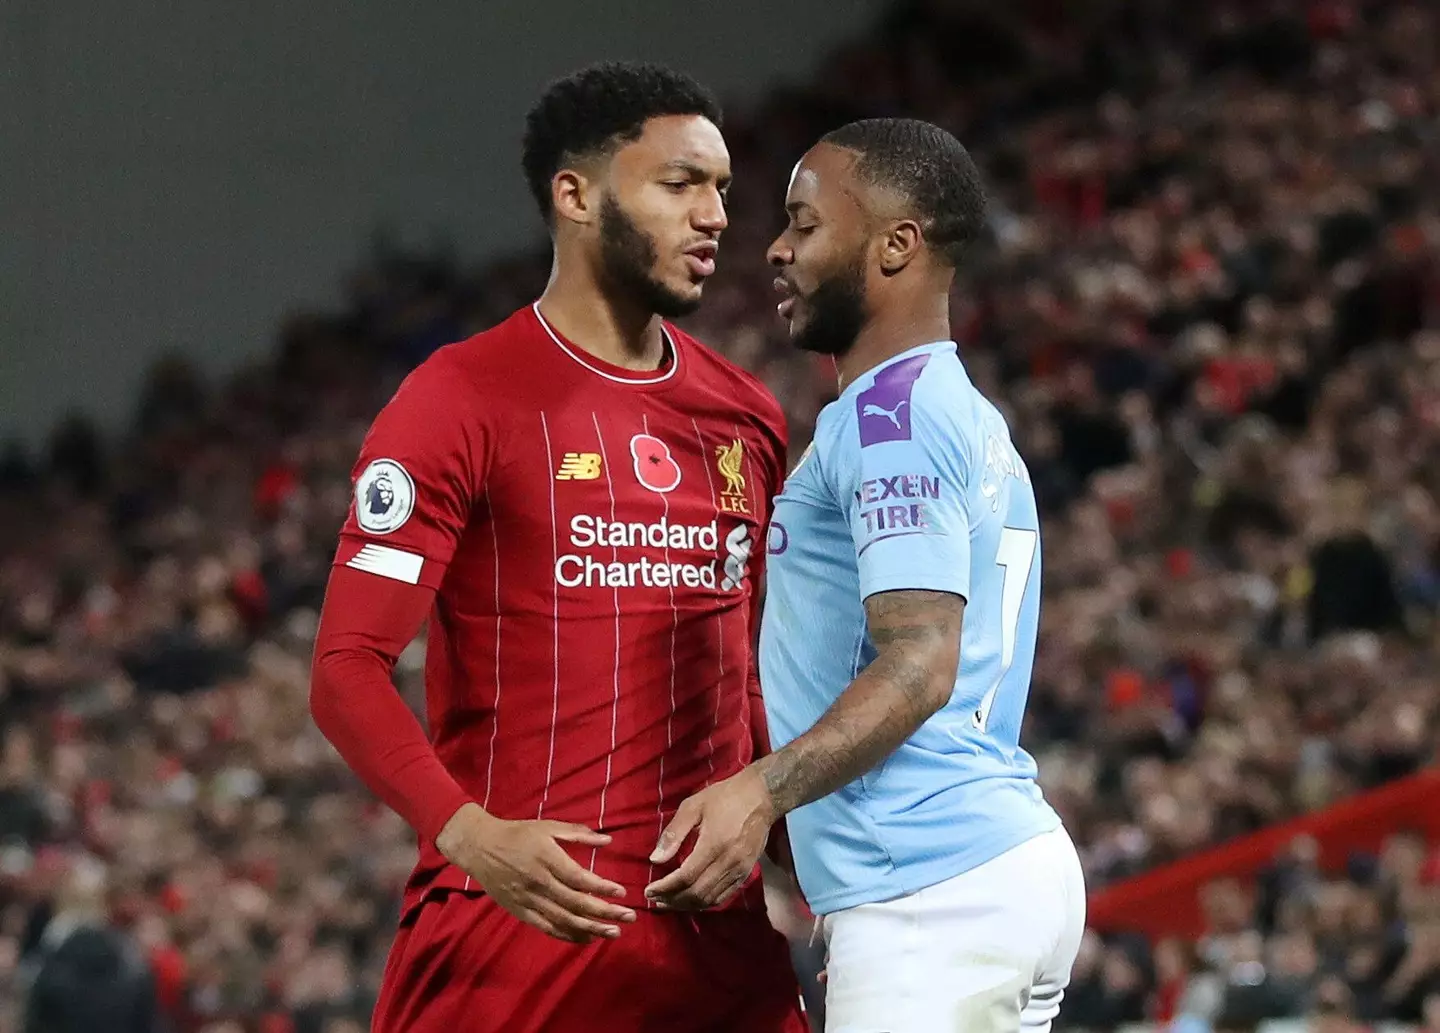 Joe Gomez and Raheem Sterling's clash was one of the heated moments in the rivalry. Image: PA Images